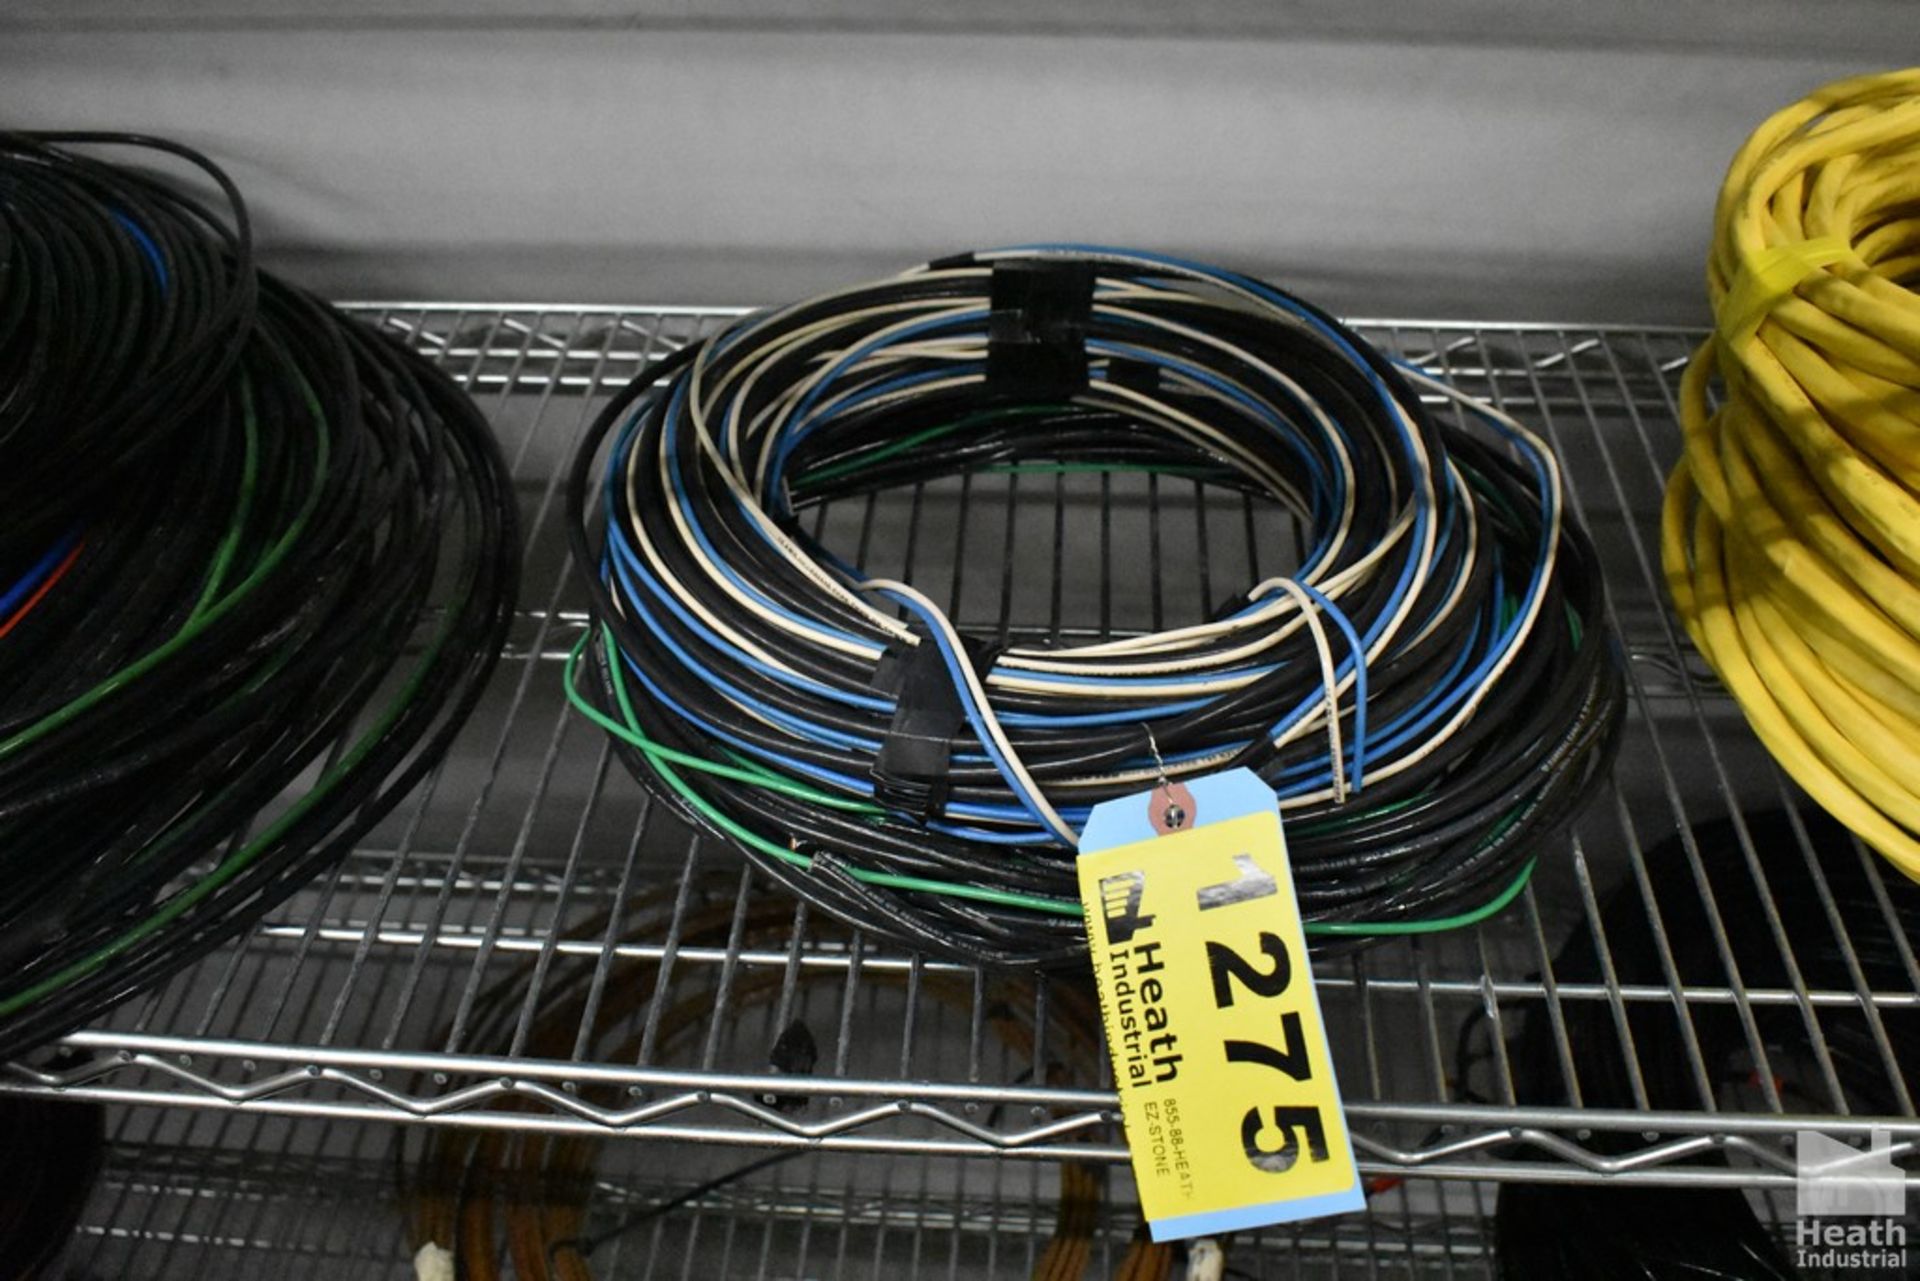 LARGE QUANTITY OF COPPER WIRE ON SHELF